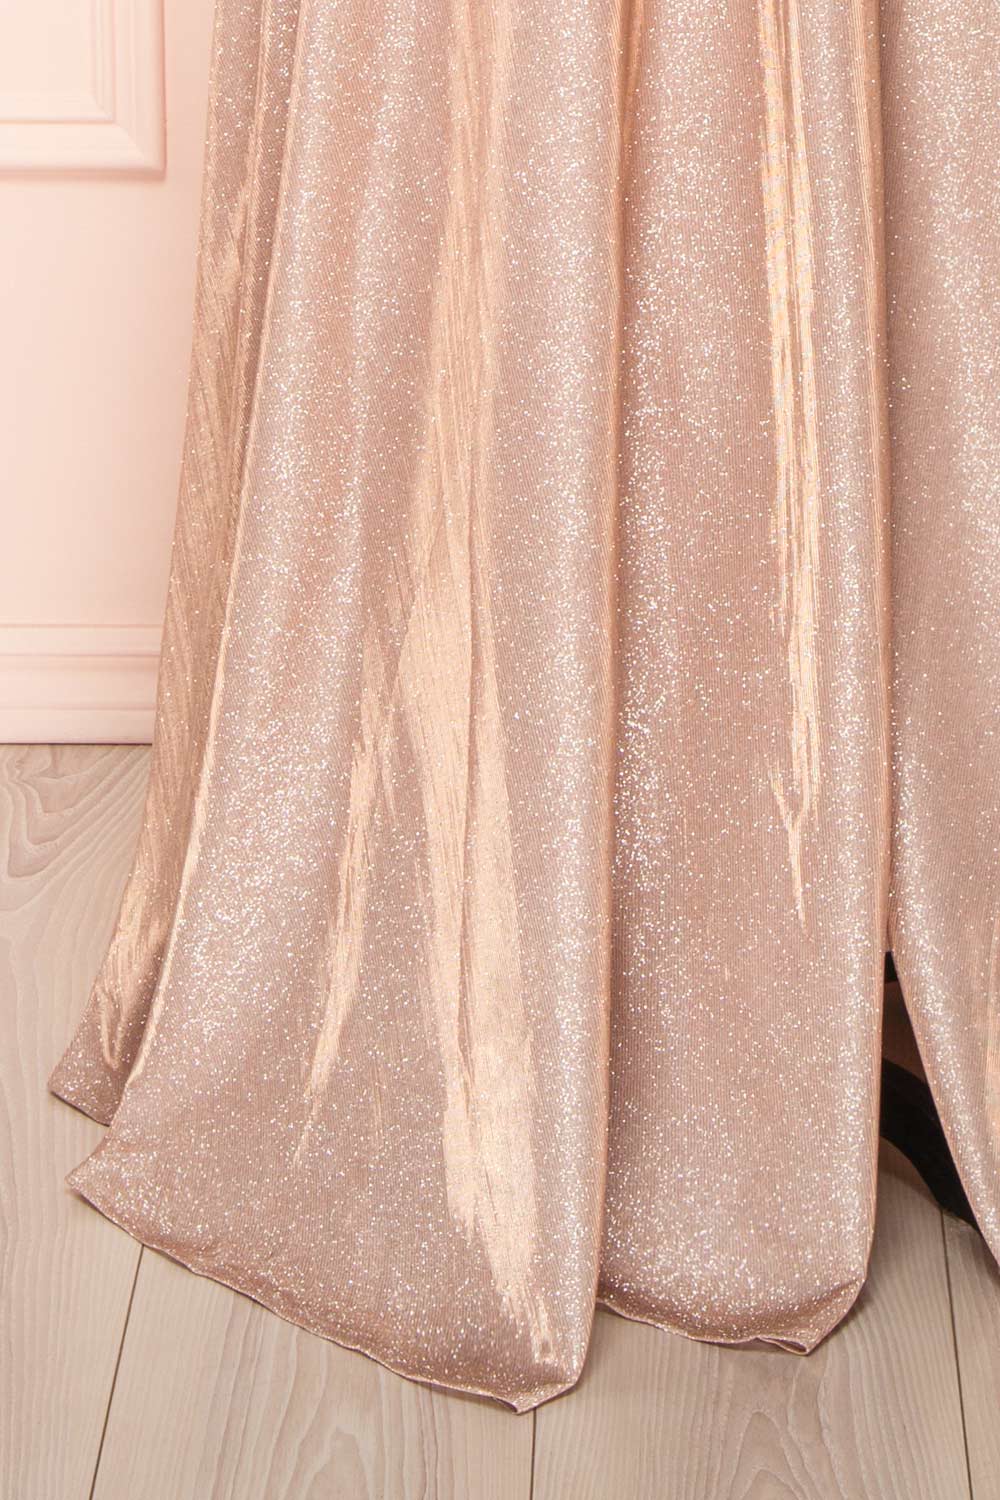 Velouette Shimmery Rose Gold Maxi Dress - Boutique 1861 bottom 